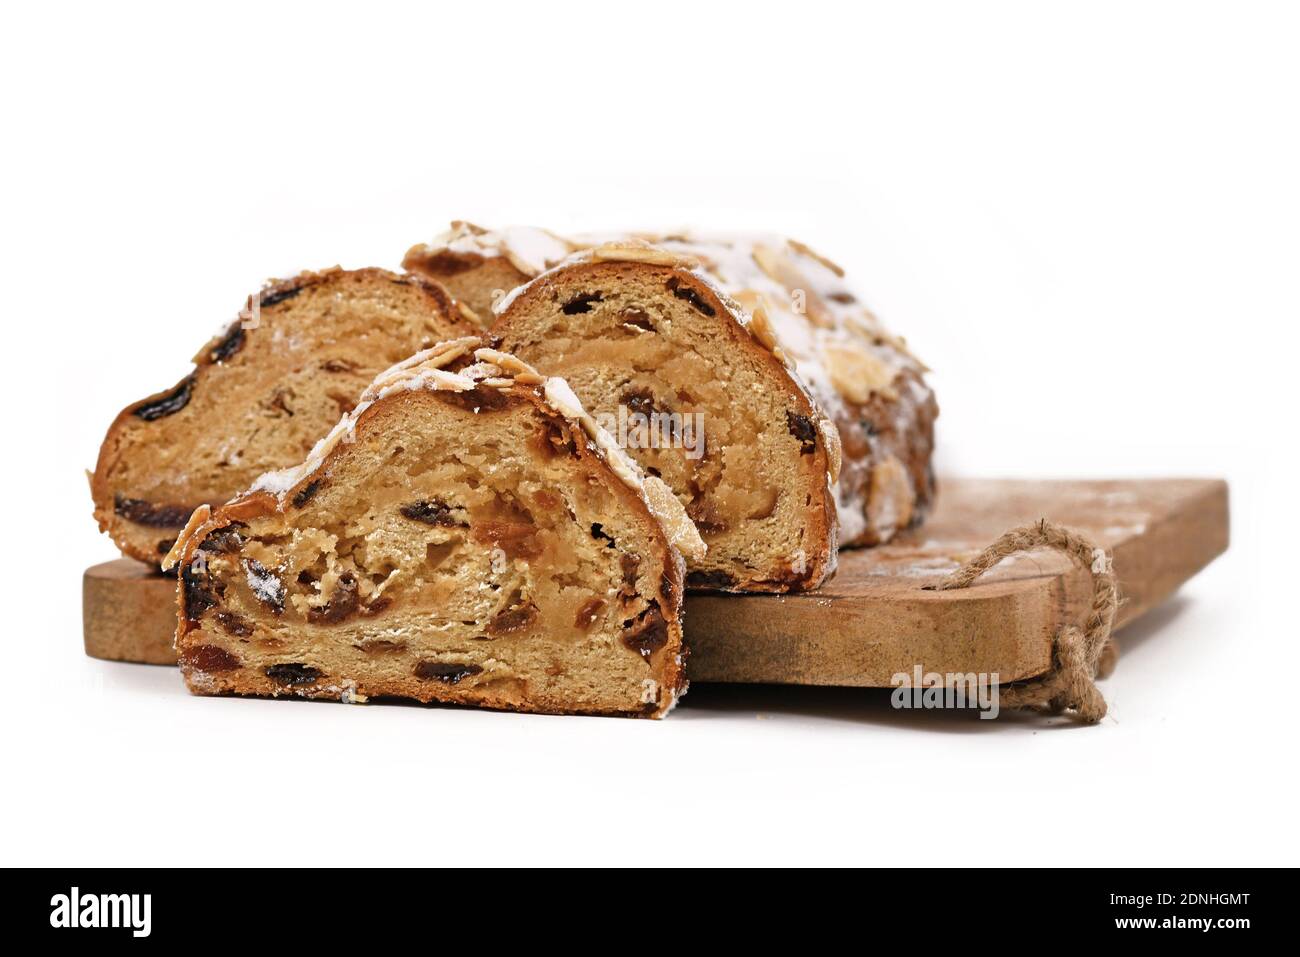 German Stollen cake, a fruit bread with nuts, spices, and dried or candied fruits with powdered sugar traditionally served during Christmas time Stock Photo